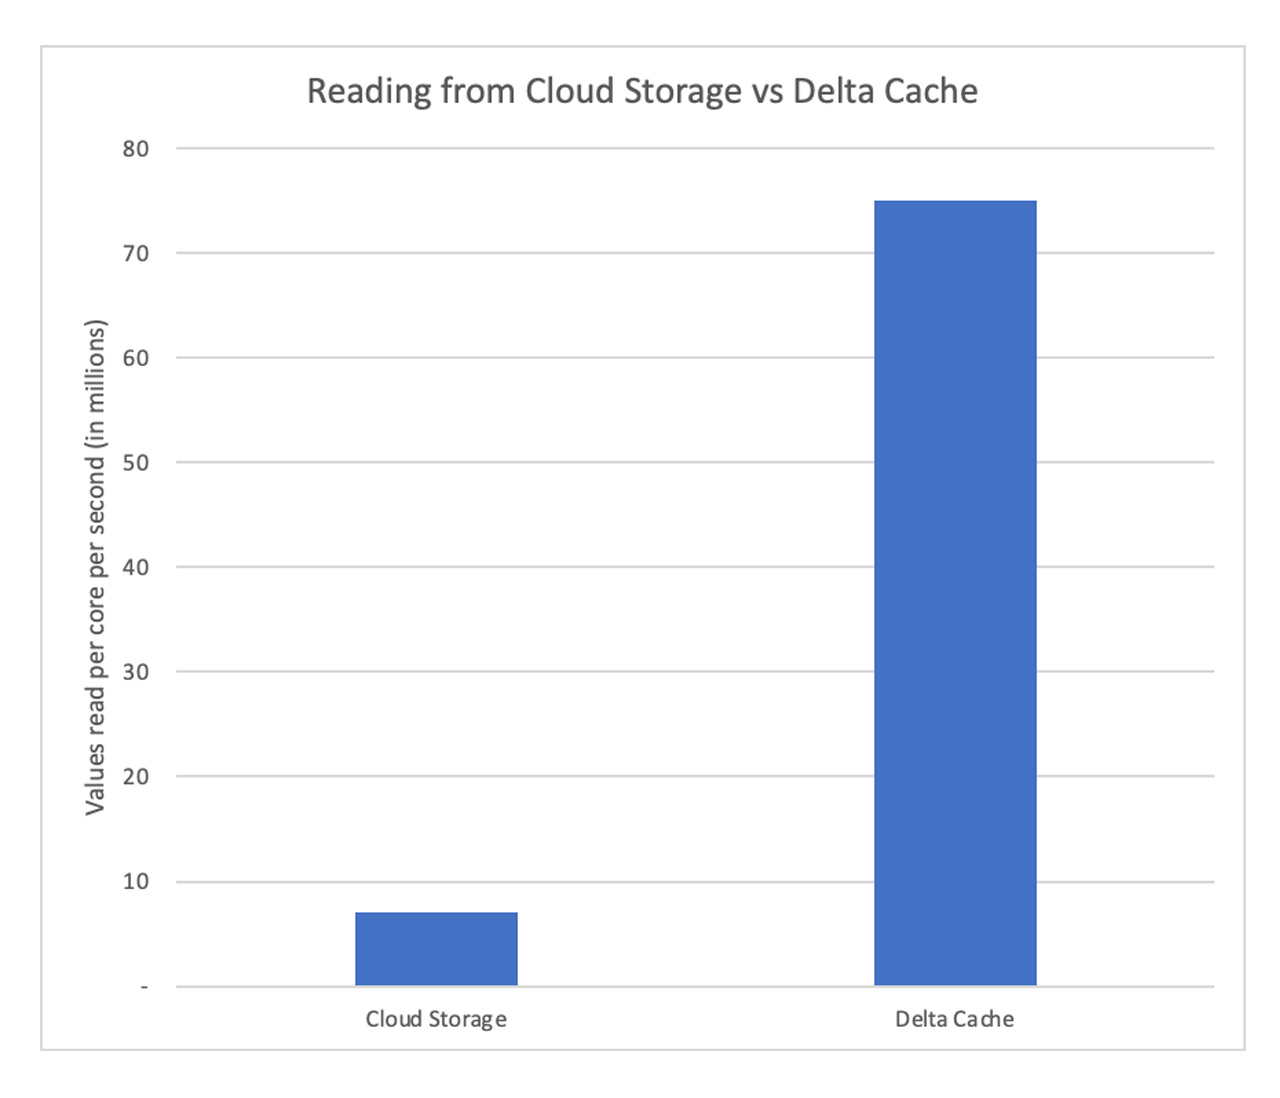 Reading from cloud storage vs. Delta Cache. 